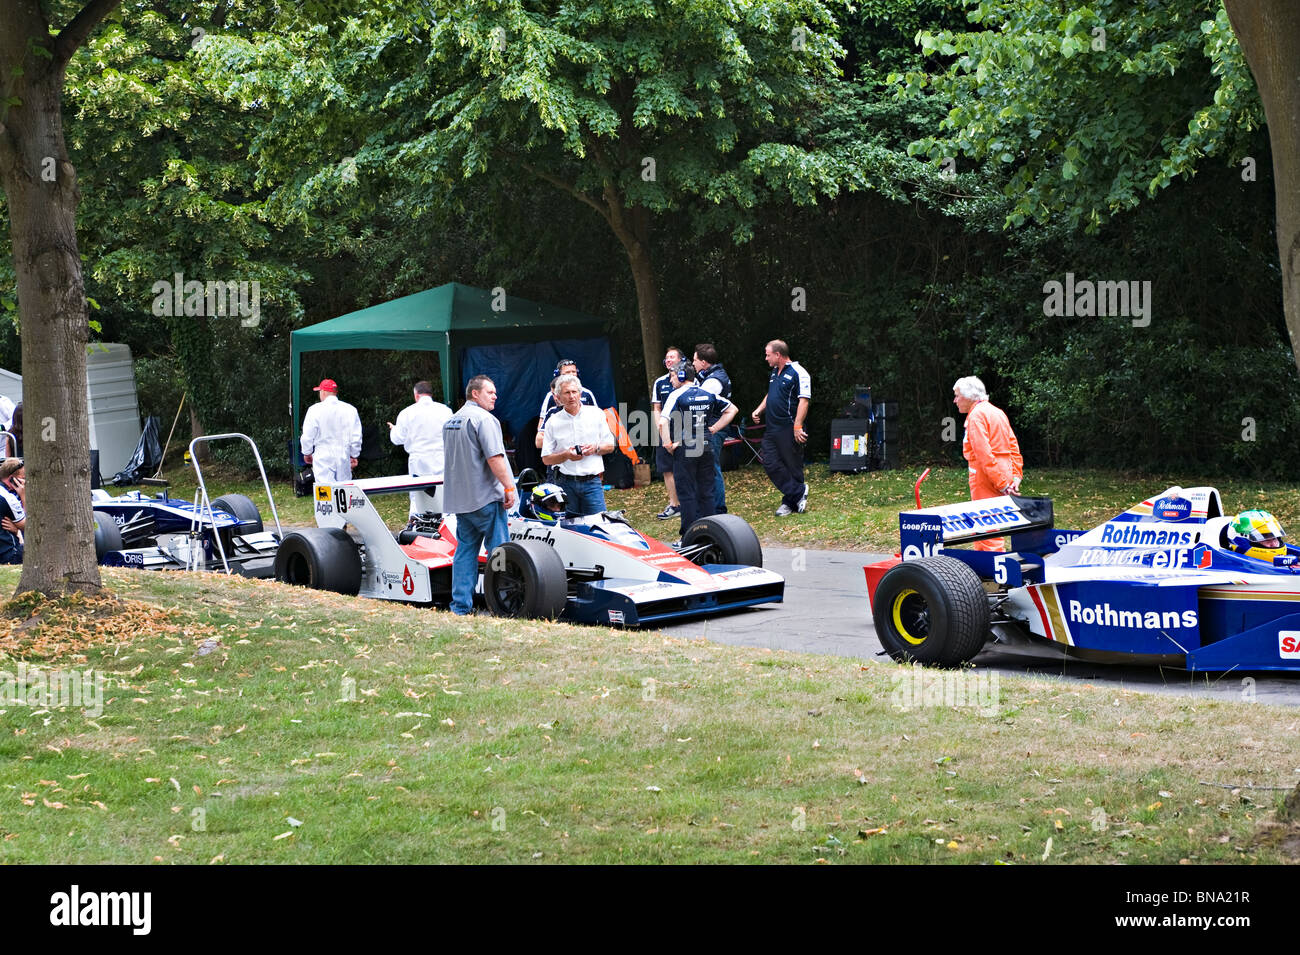 Williams-Renault FW18 and Toleman-Hart TG183B Formula One Racing Cars at Goodwood Festival of Speed West Sussex England UK Stock Photo